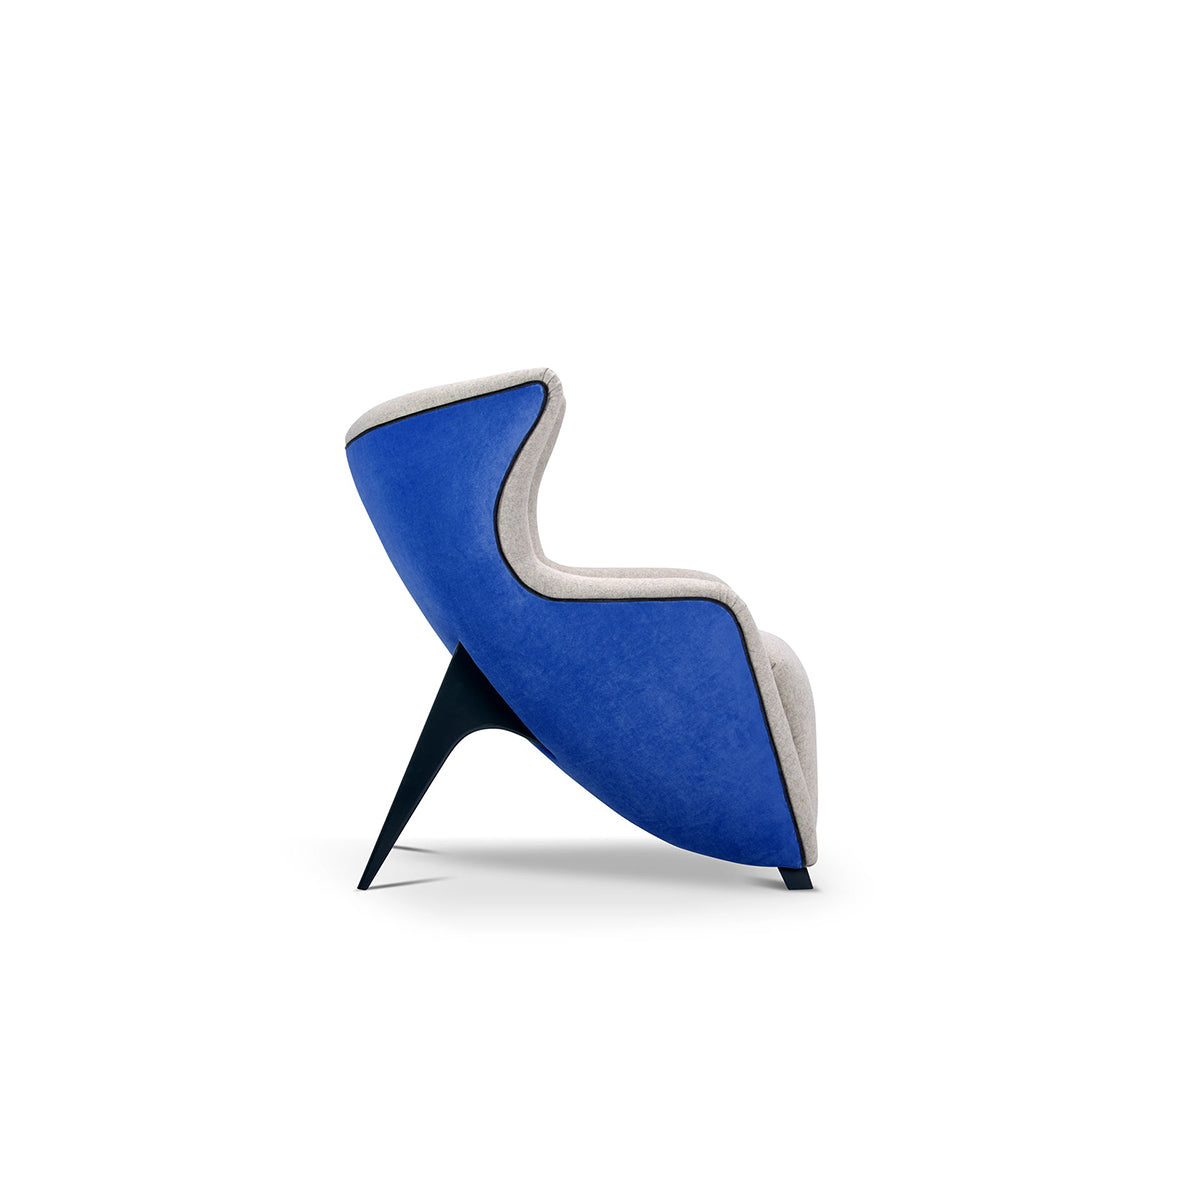 Gea Armchair with Wings by Adrenalina - by Giovanni Tommaso Garattoni